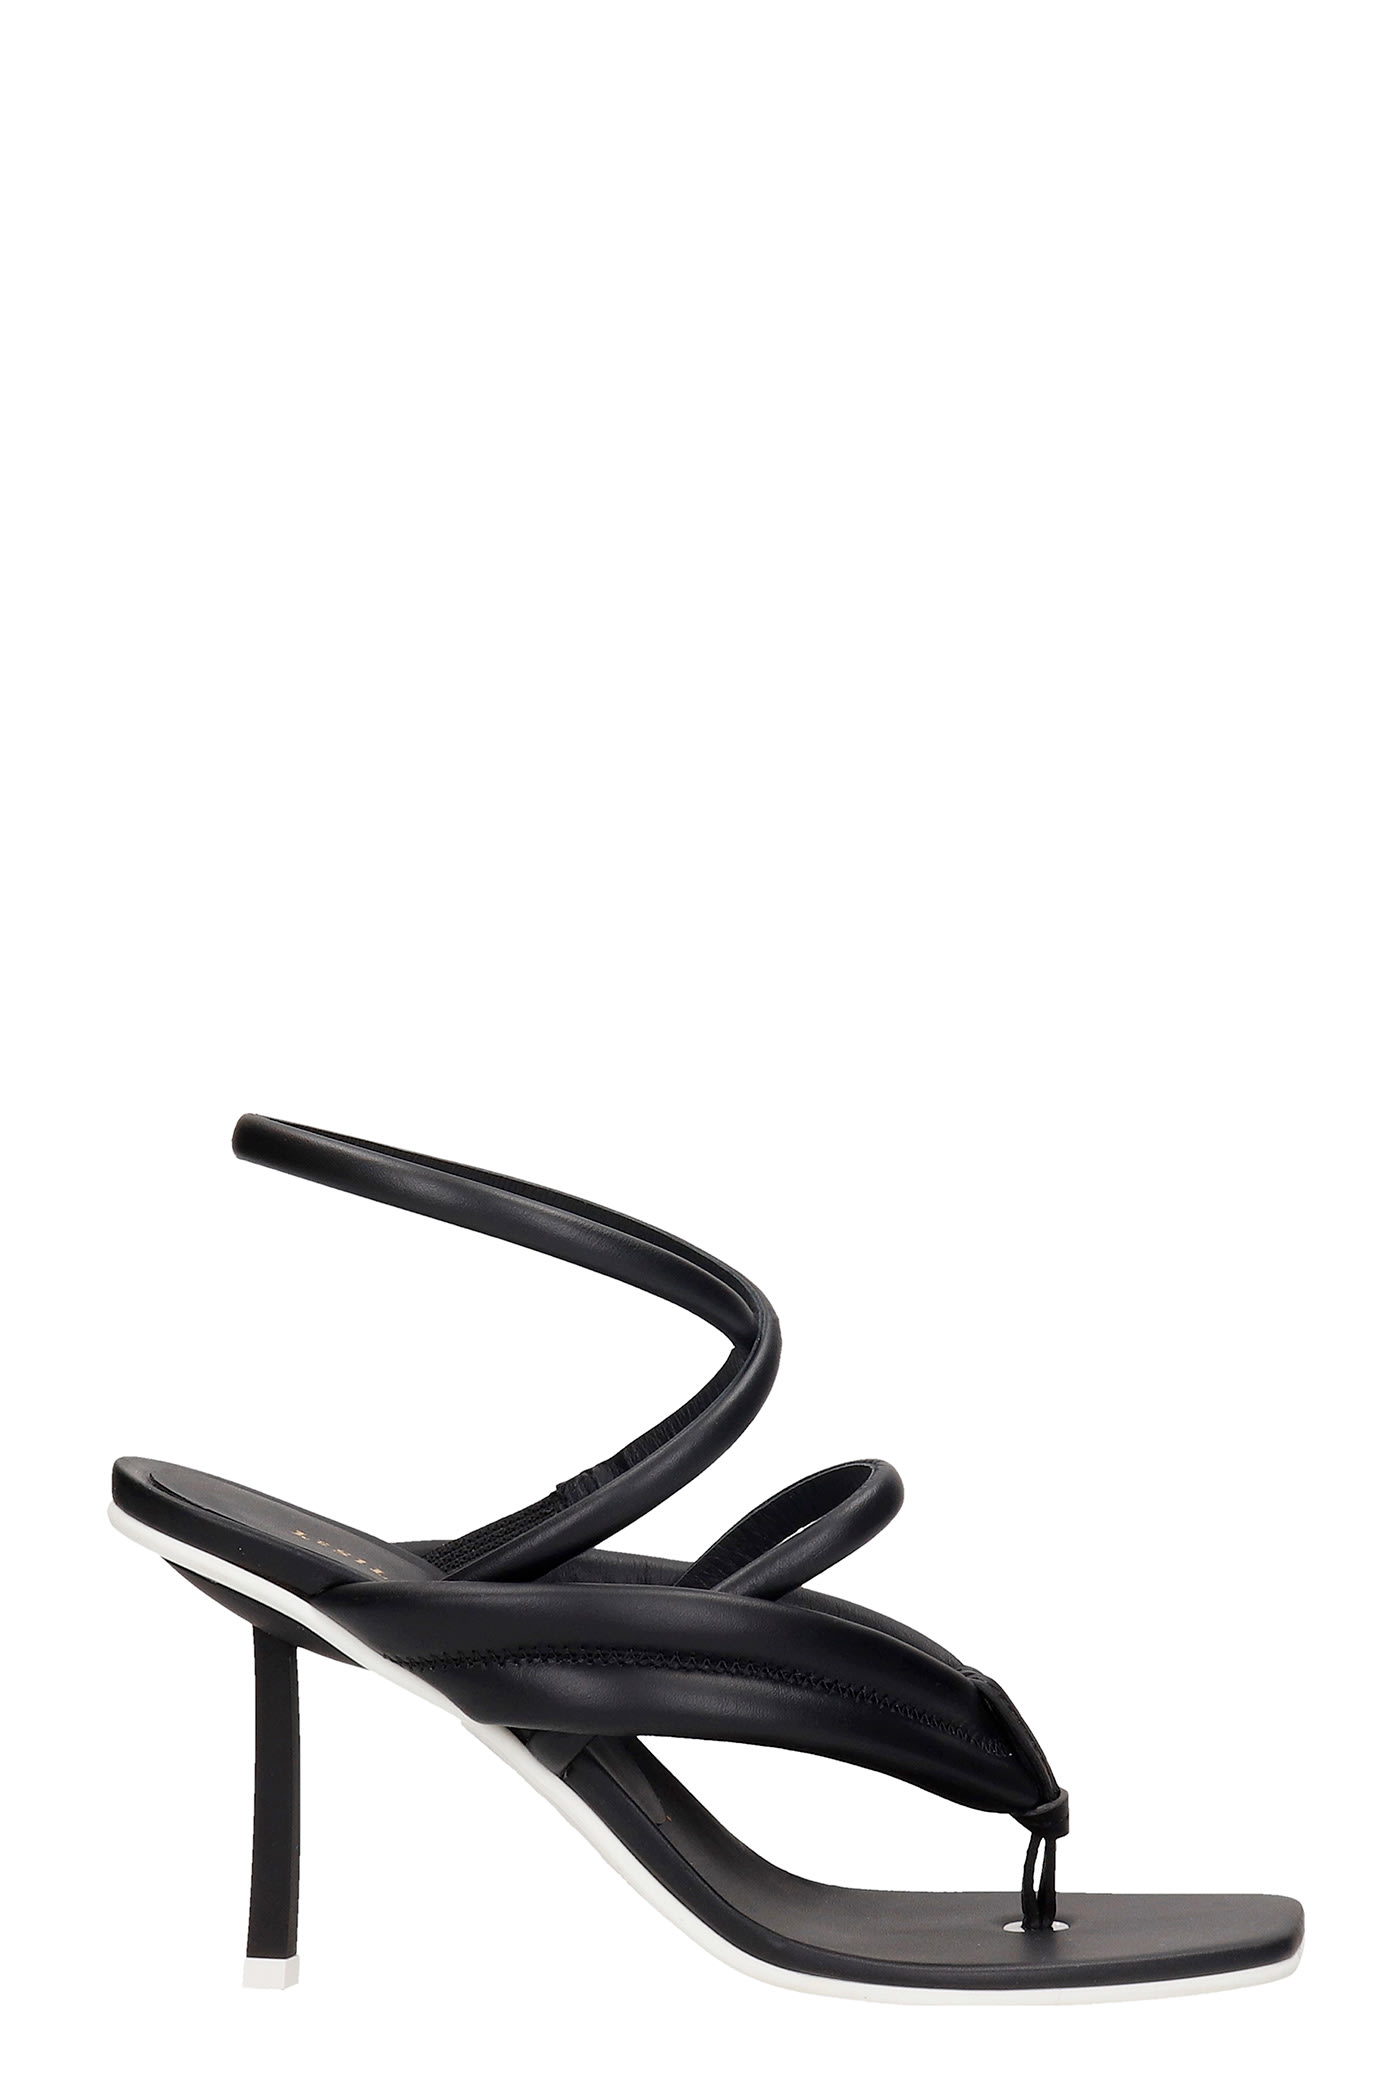 Le Silla Sandals In Black Leather